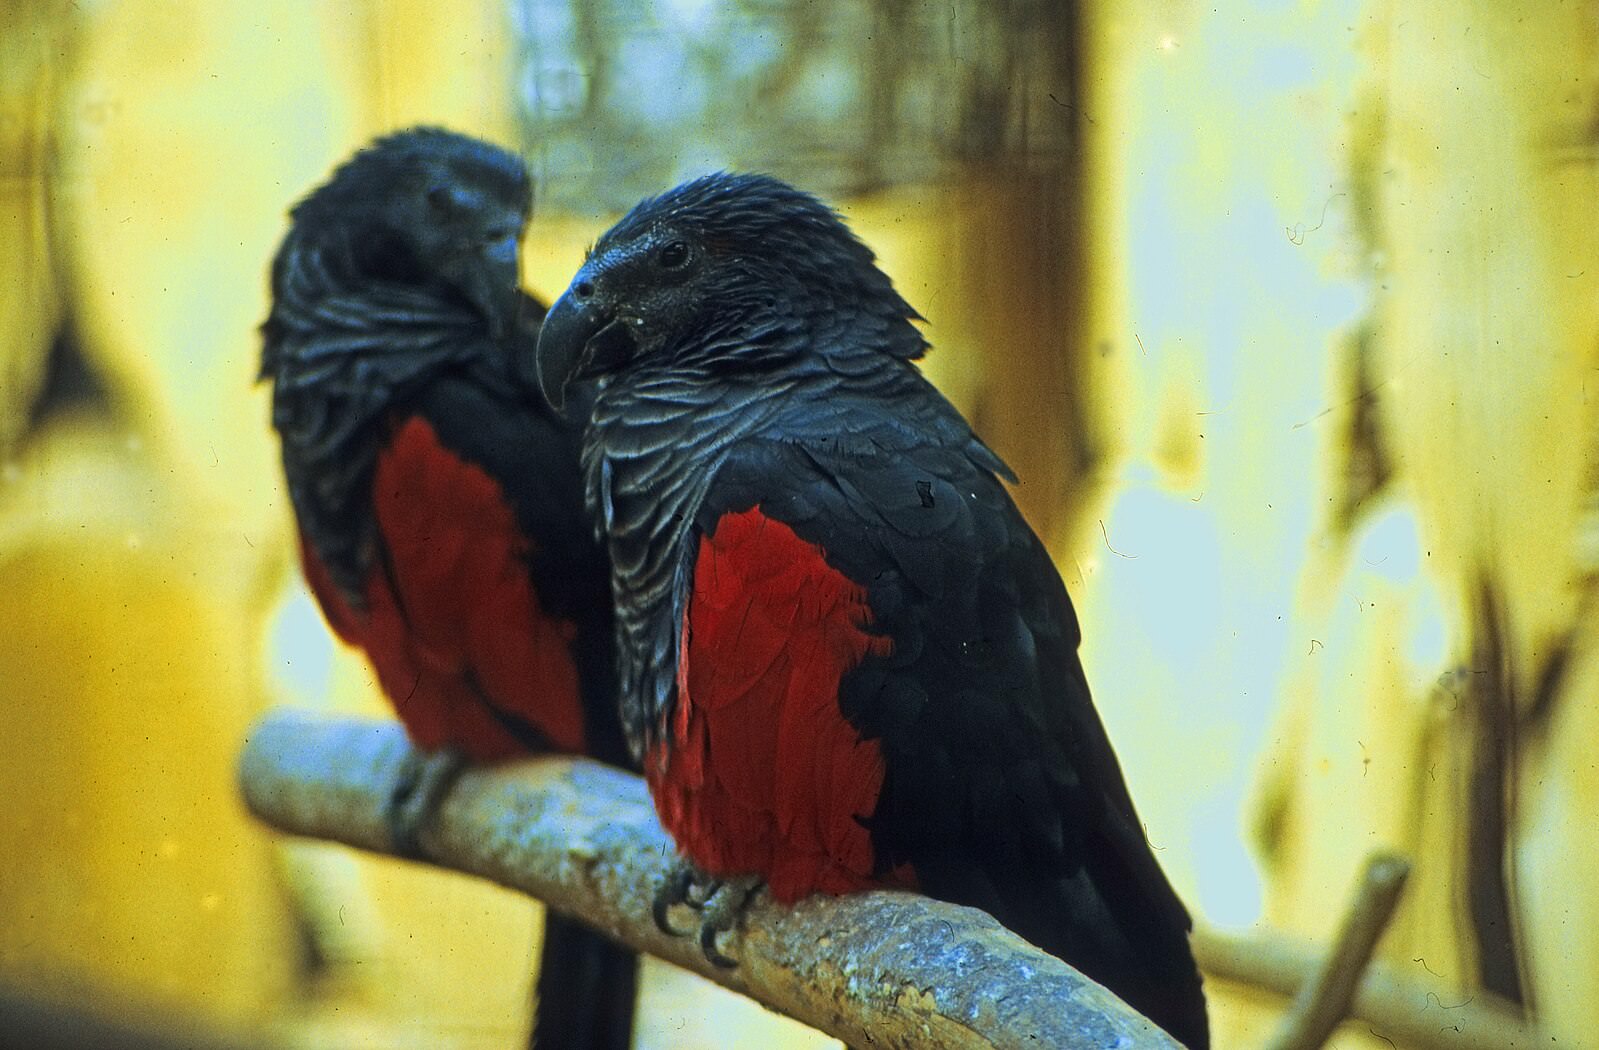 The Dracula parrot, native to New Guinea, is a large, ominous-looking bird with a curved beak and black feathers accentuated by red plumage. Its appearance has earned it a reputation as a vampire among birds.